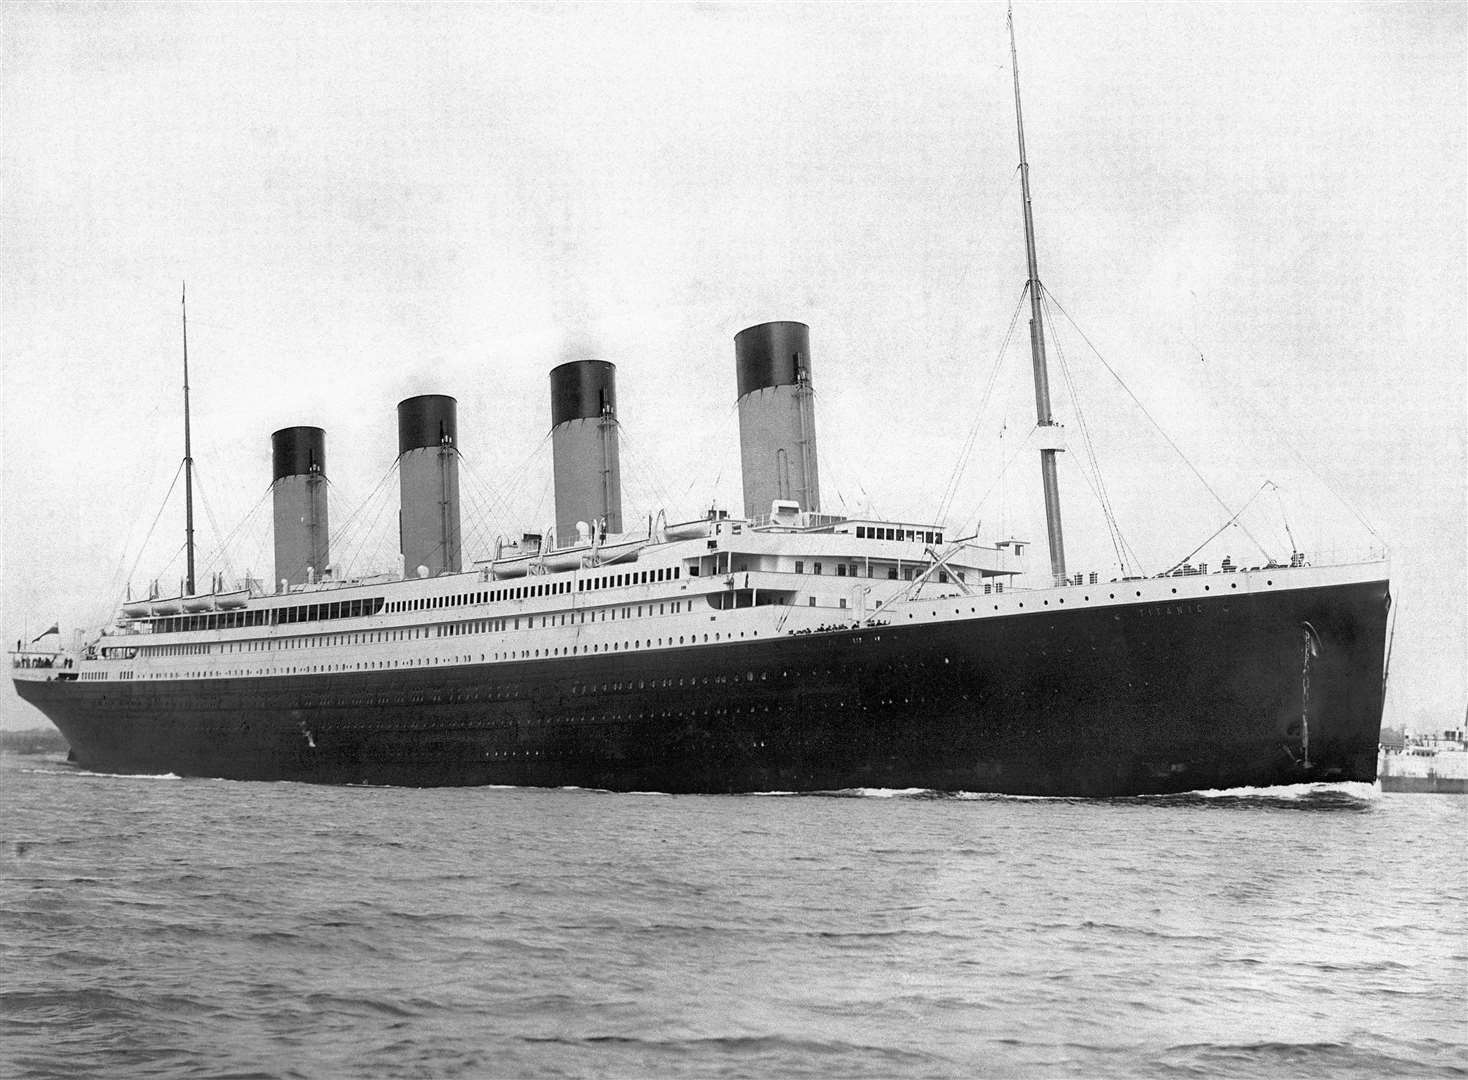 Exceptional atmospheric conditions on the night of April 14/15, 1912, facilitated the series of fateful decisions that caused the Titanic's collision with an iceberg, and the subsequent tragic loss of life.